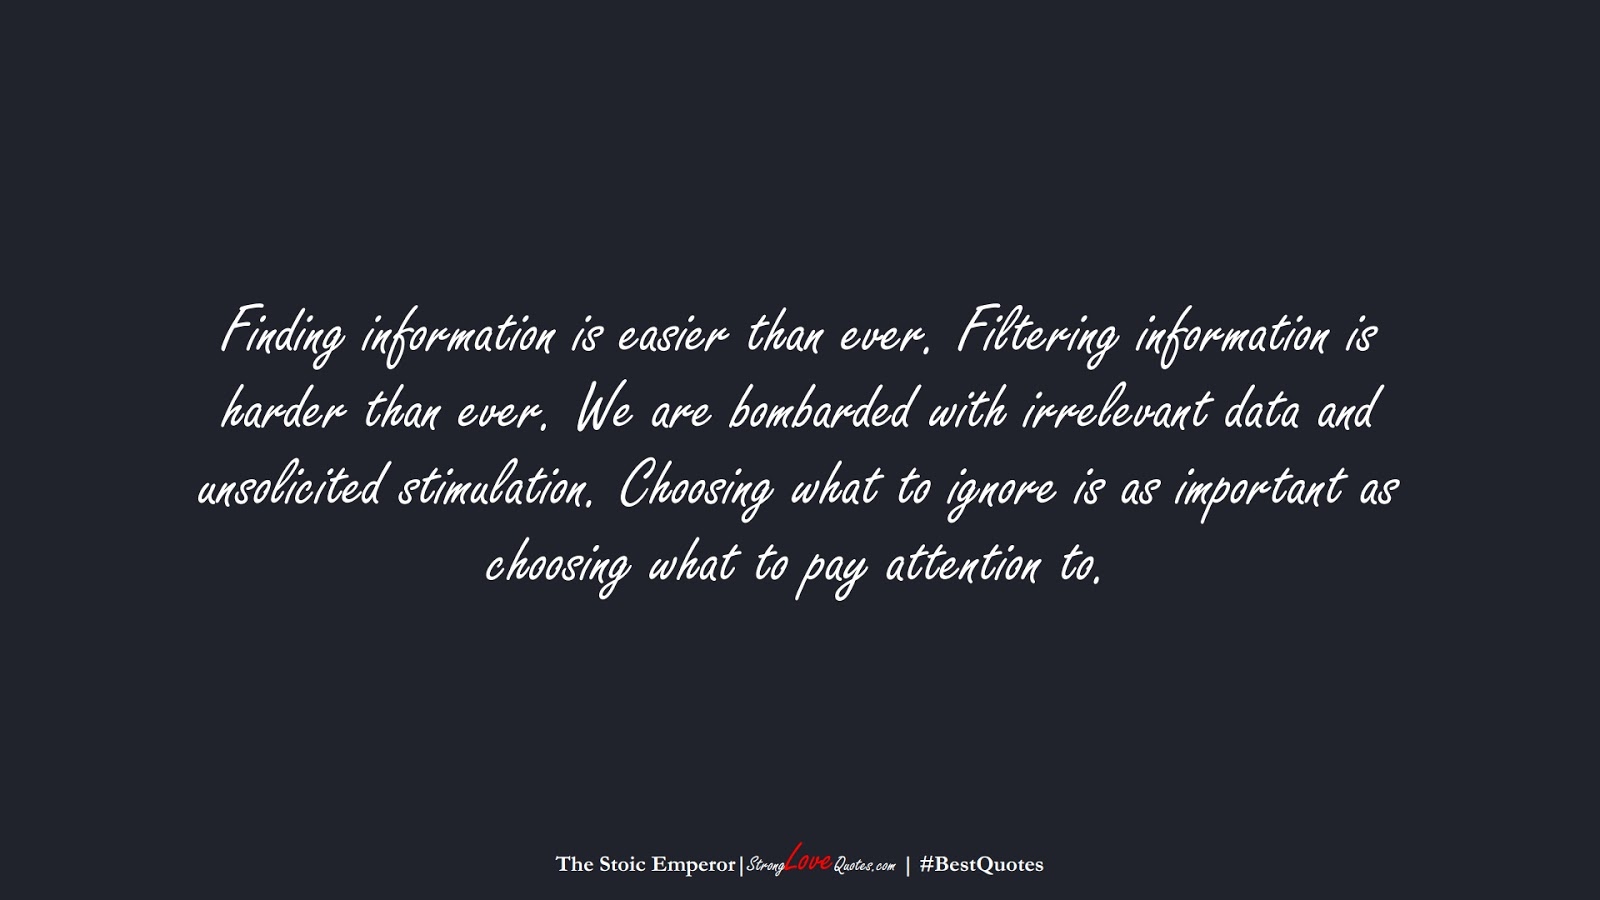 Finding information is easier than ever. Filtering information is harder than ever. We are bombarded with irrelevant data and unsolicited stimulation. Choosing what to ignore is as important as choosing what to pay attention to. (The Stoic Emperor);  #BestQuotes